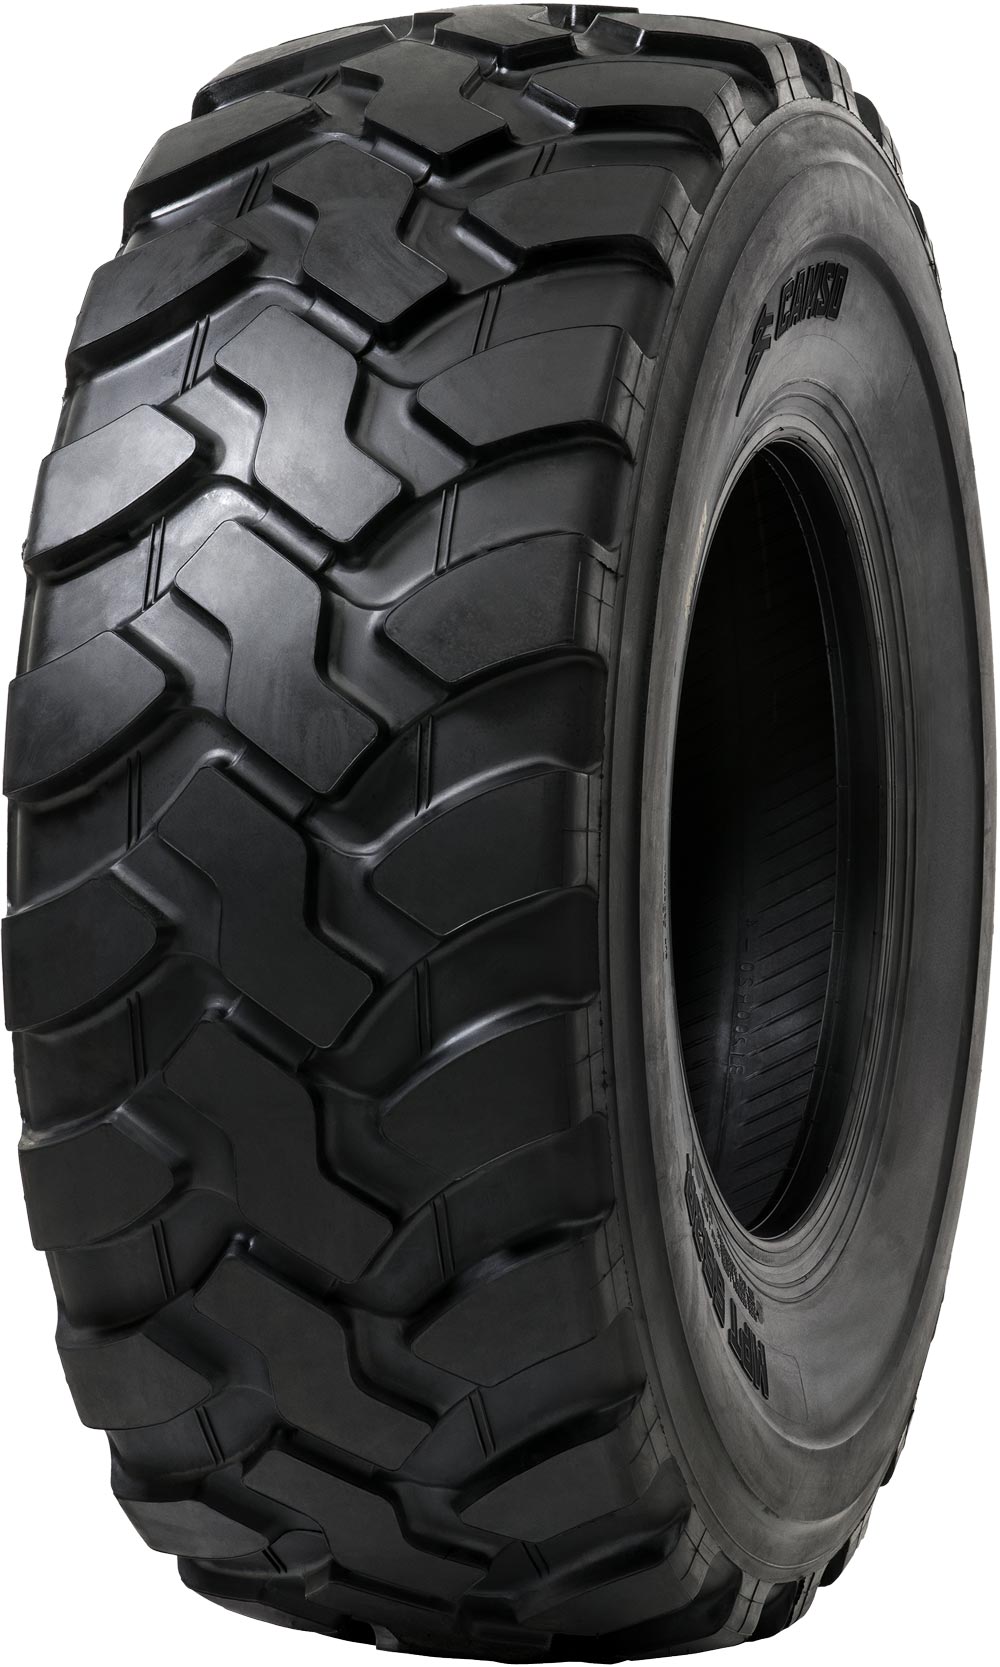 product_type-industrial_tires Camso MPT 553R 365/80 R20 153R